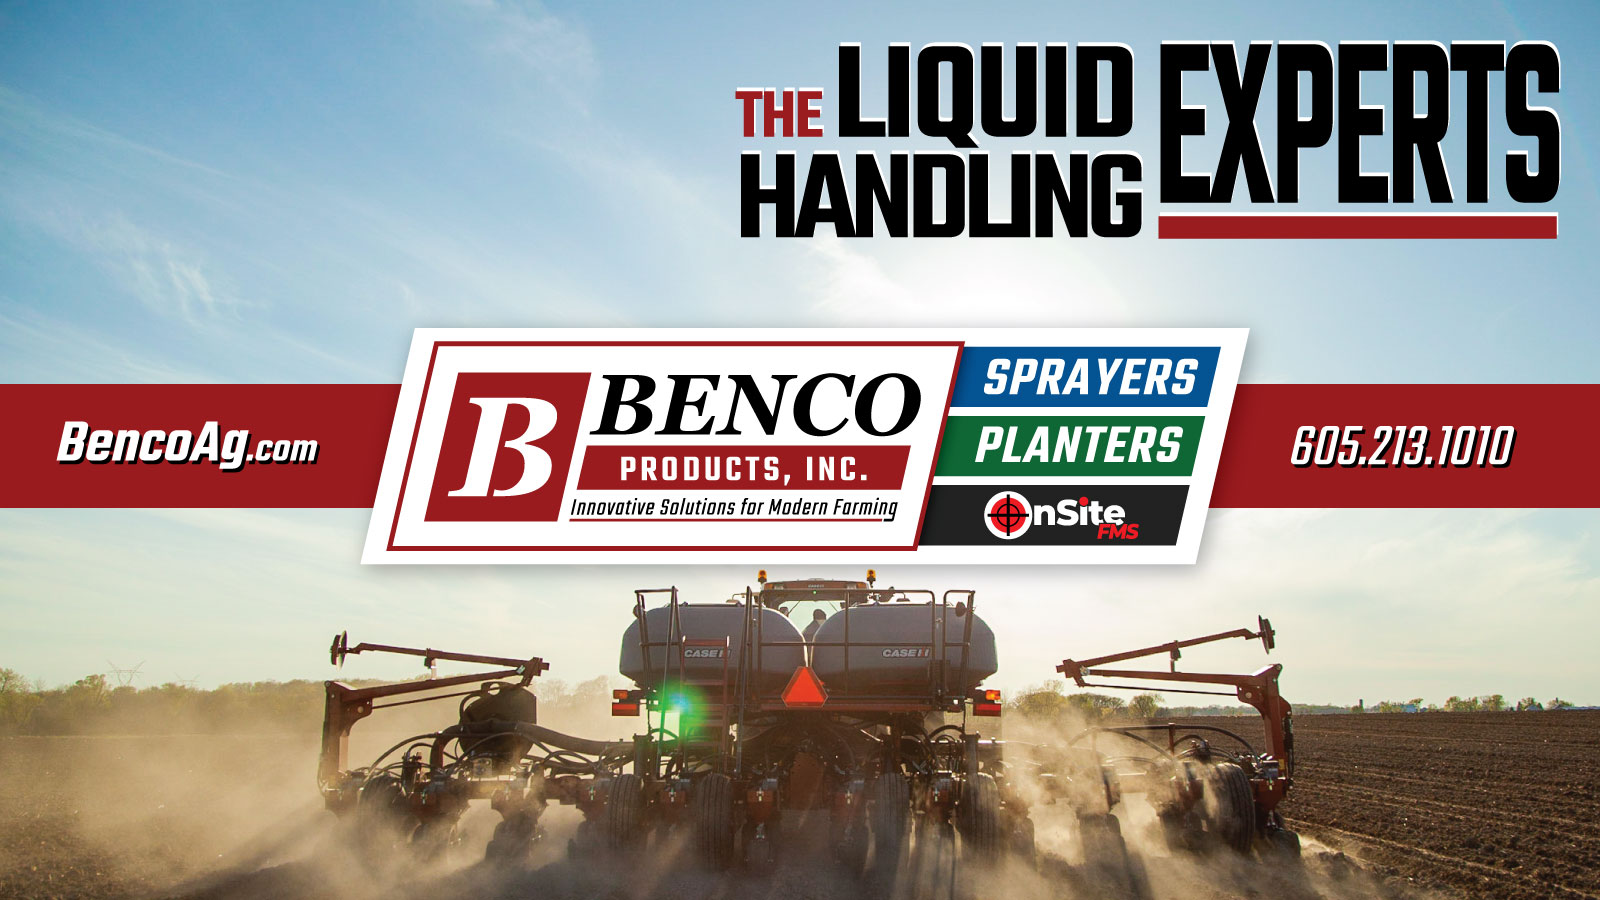 Benco Products in Tea, SD is your Liquid Handling Expert for planters and sprayers